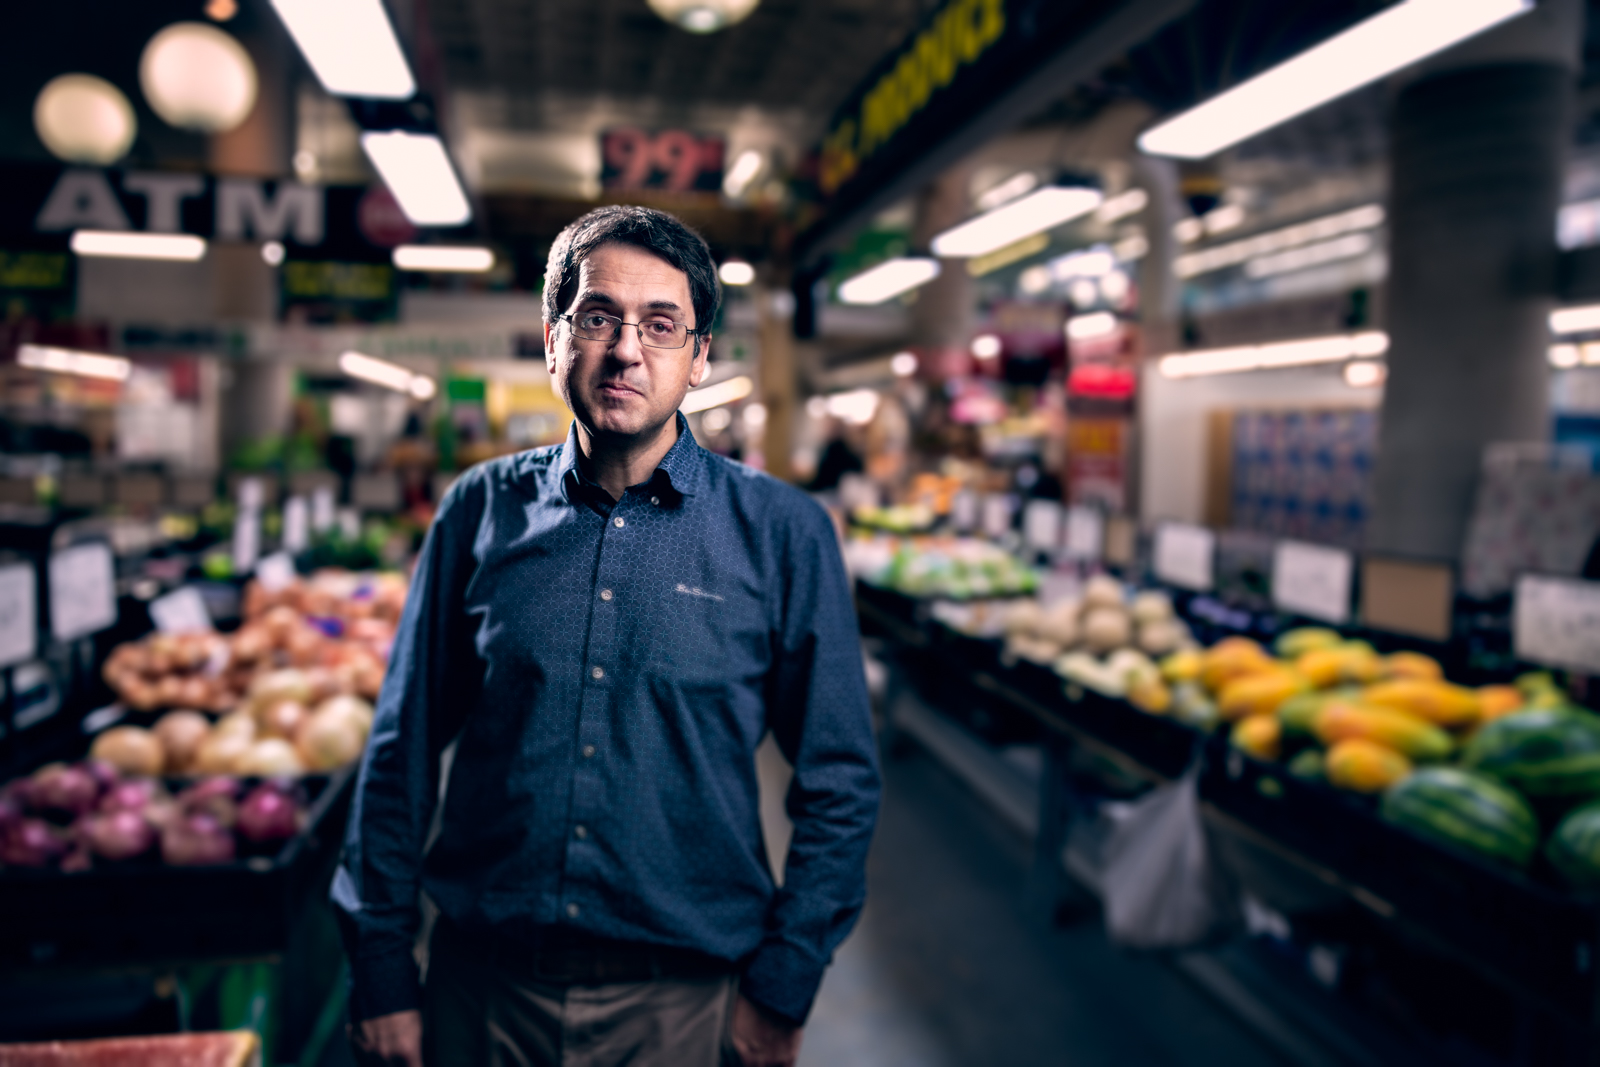 Dr. Andrew Mente in the produce aisle of a grocery store